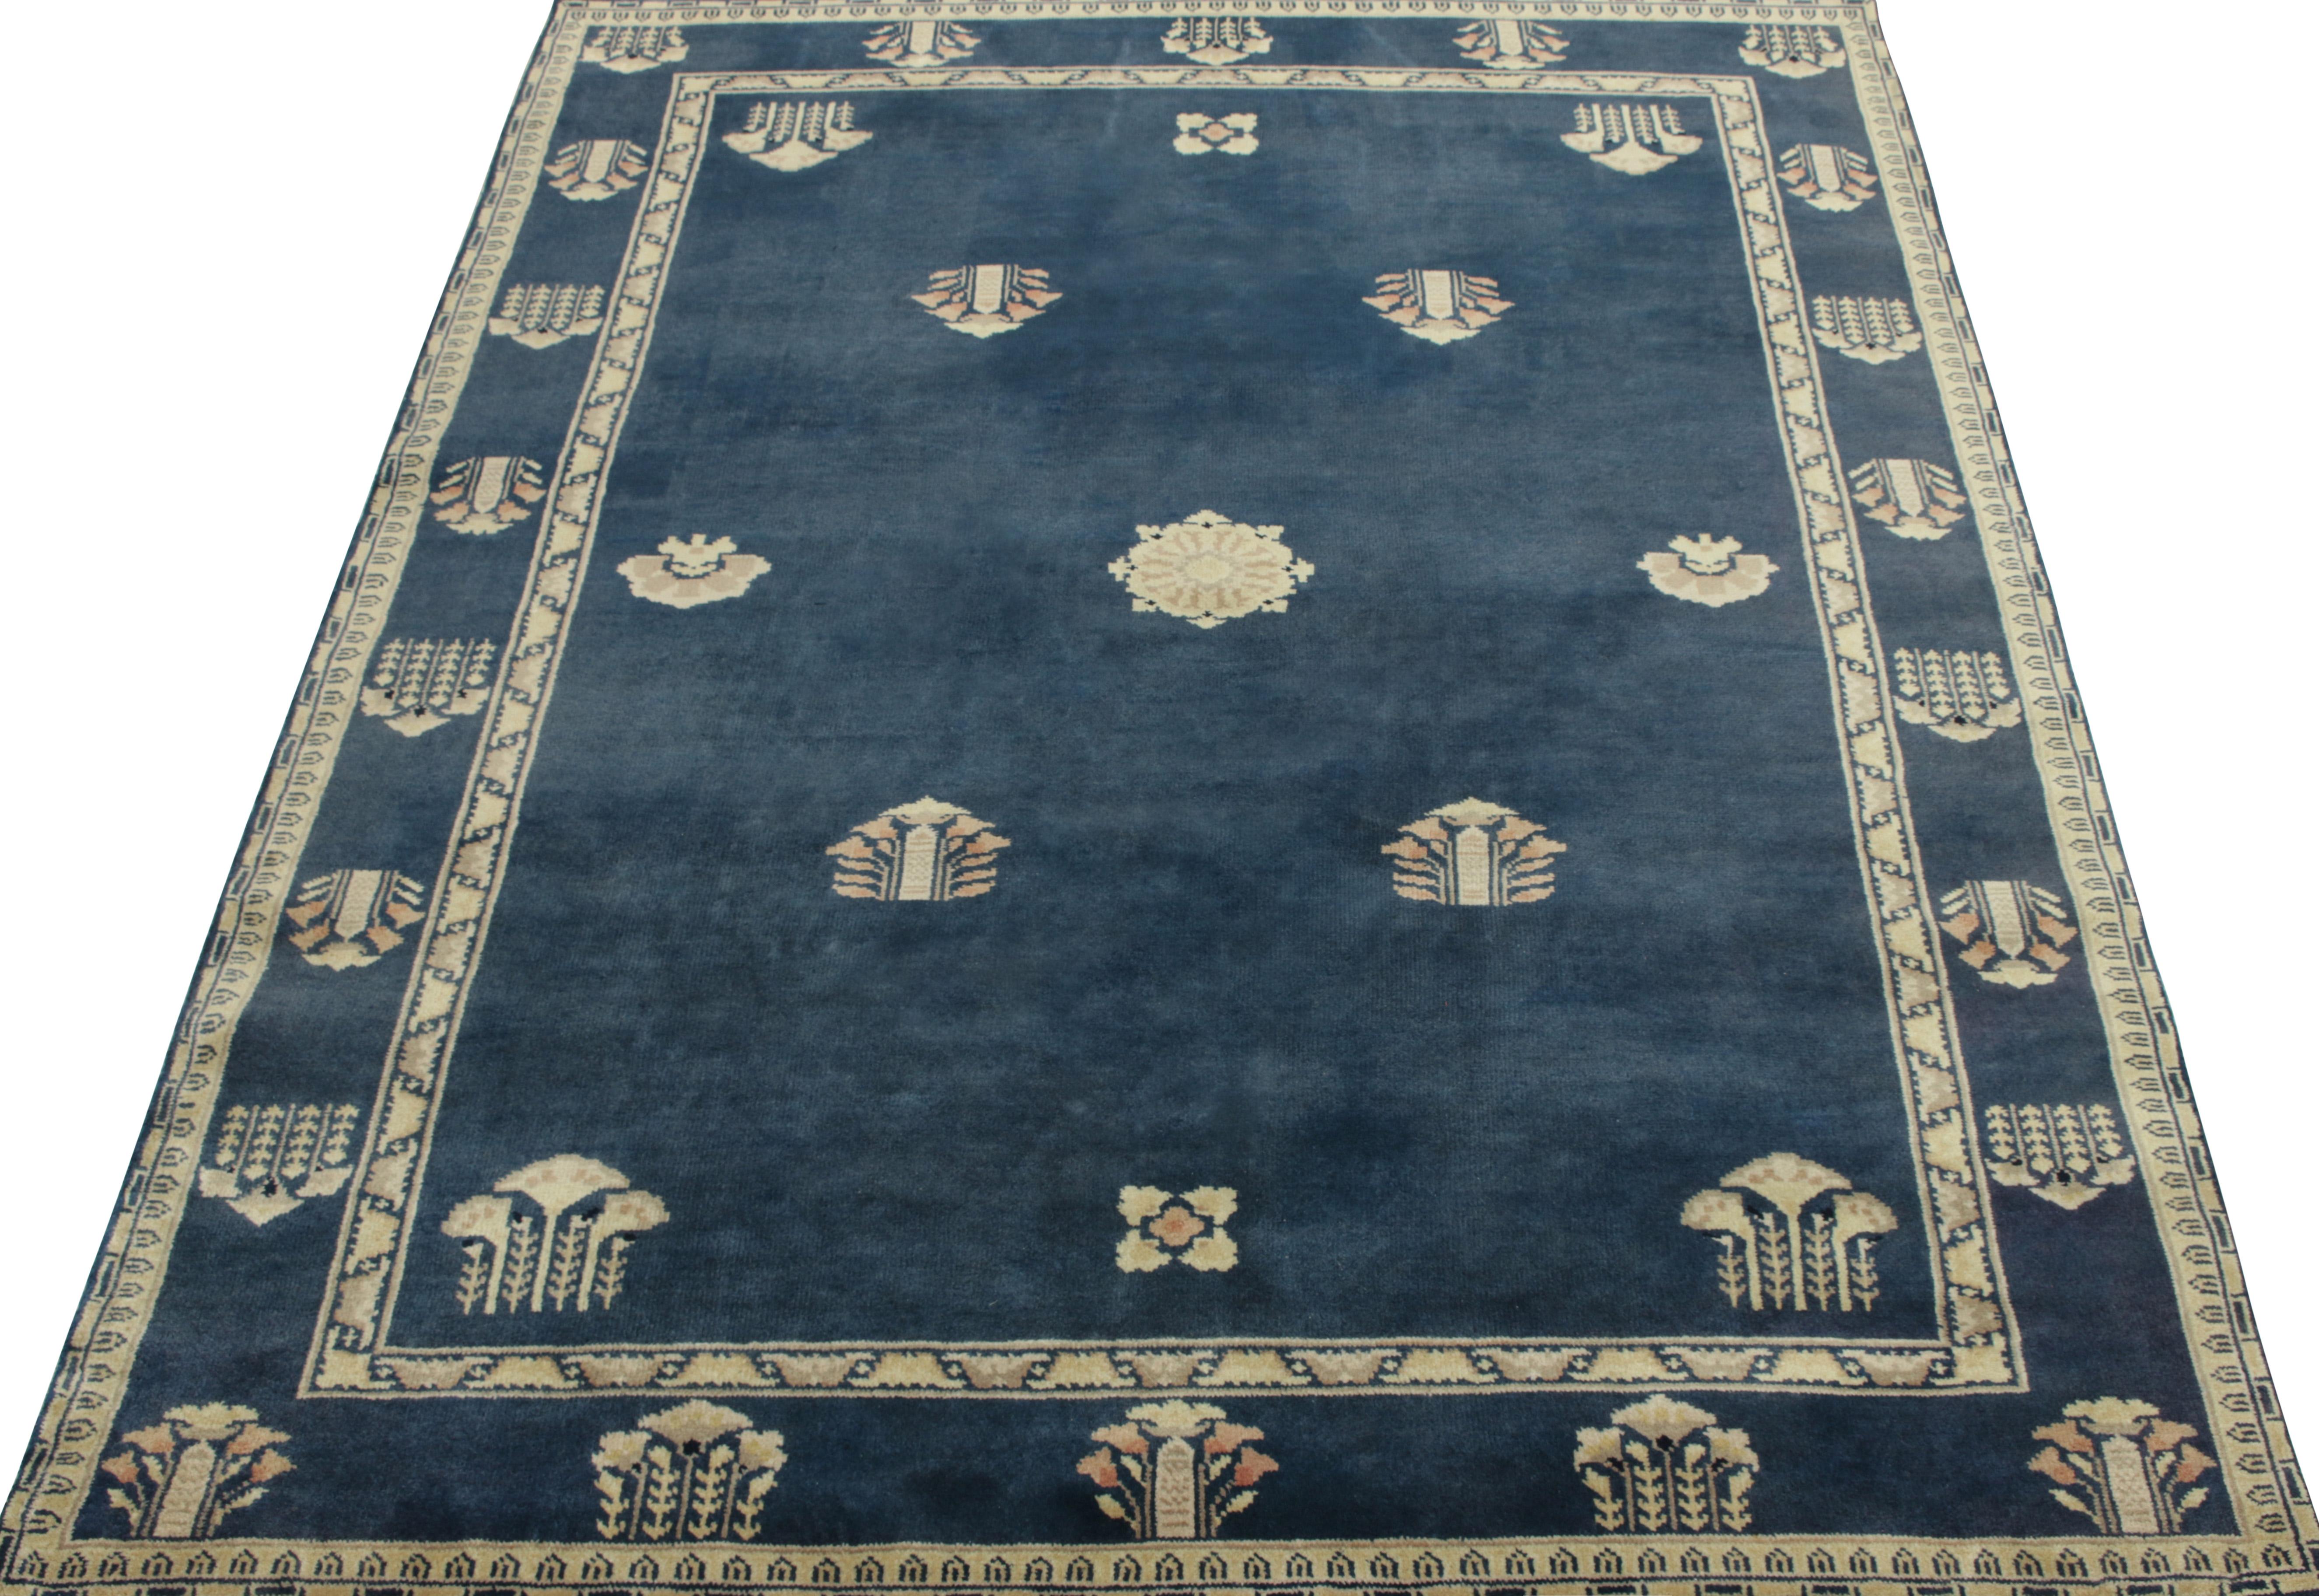 A 5 x 7 vintage rug exemplifying Chinese Deco sensibilities, featuring intricate floral patterns on field & border alike in tones of cream, light red & grey on a lush blue background inviting an enticing play of light. Hand-knotted in a healthy wool